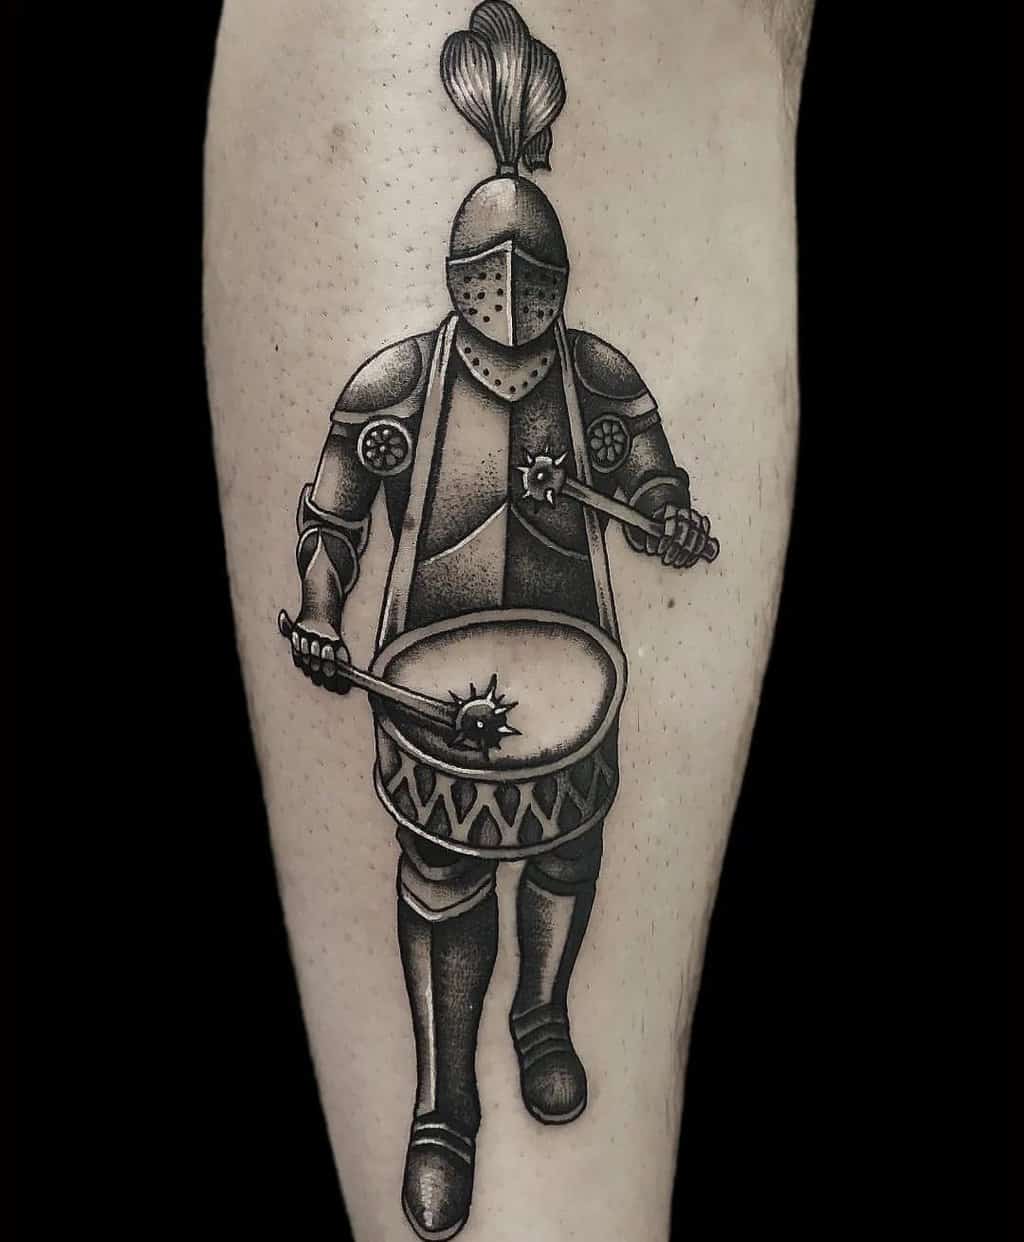 Tattoo of the drummer knight